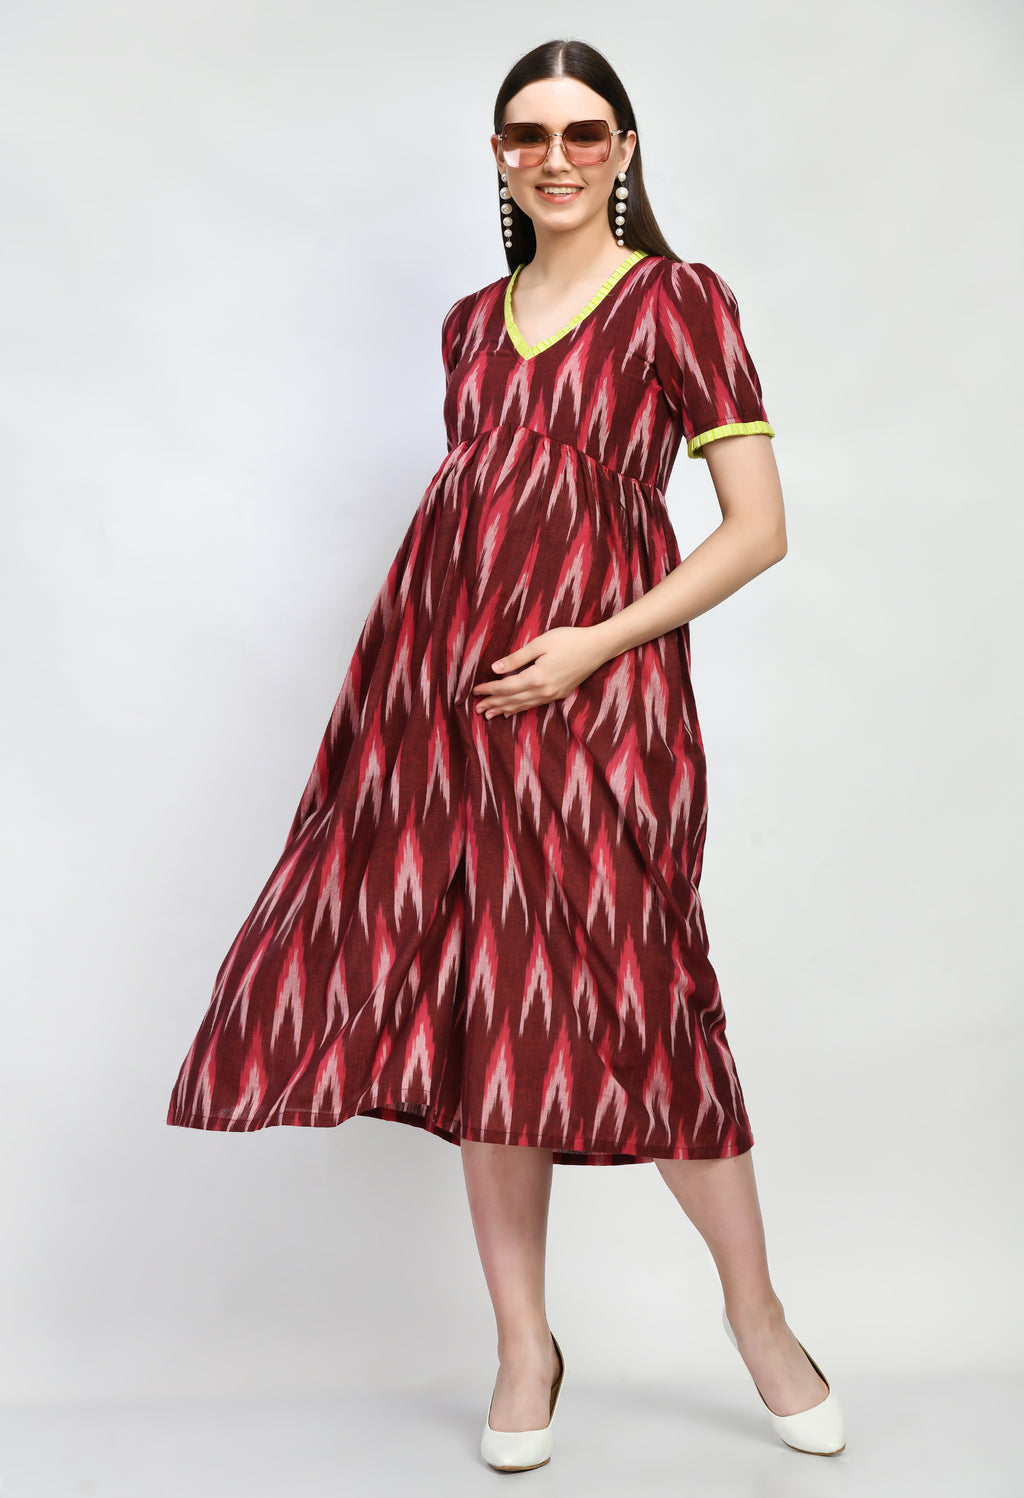 Shop Stylish Maternity Dresses Online - Find Your Perfect Pregnancy Look